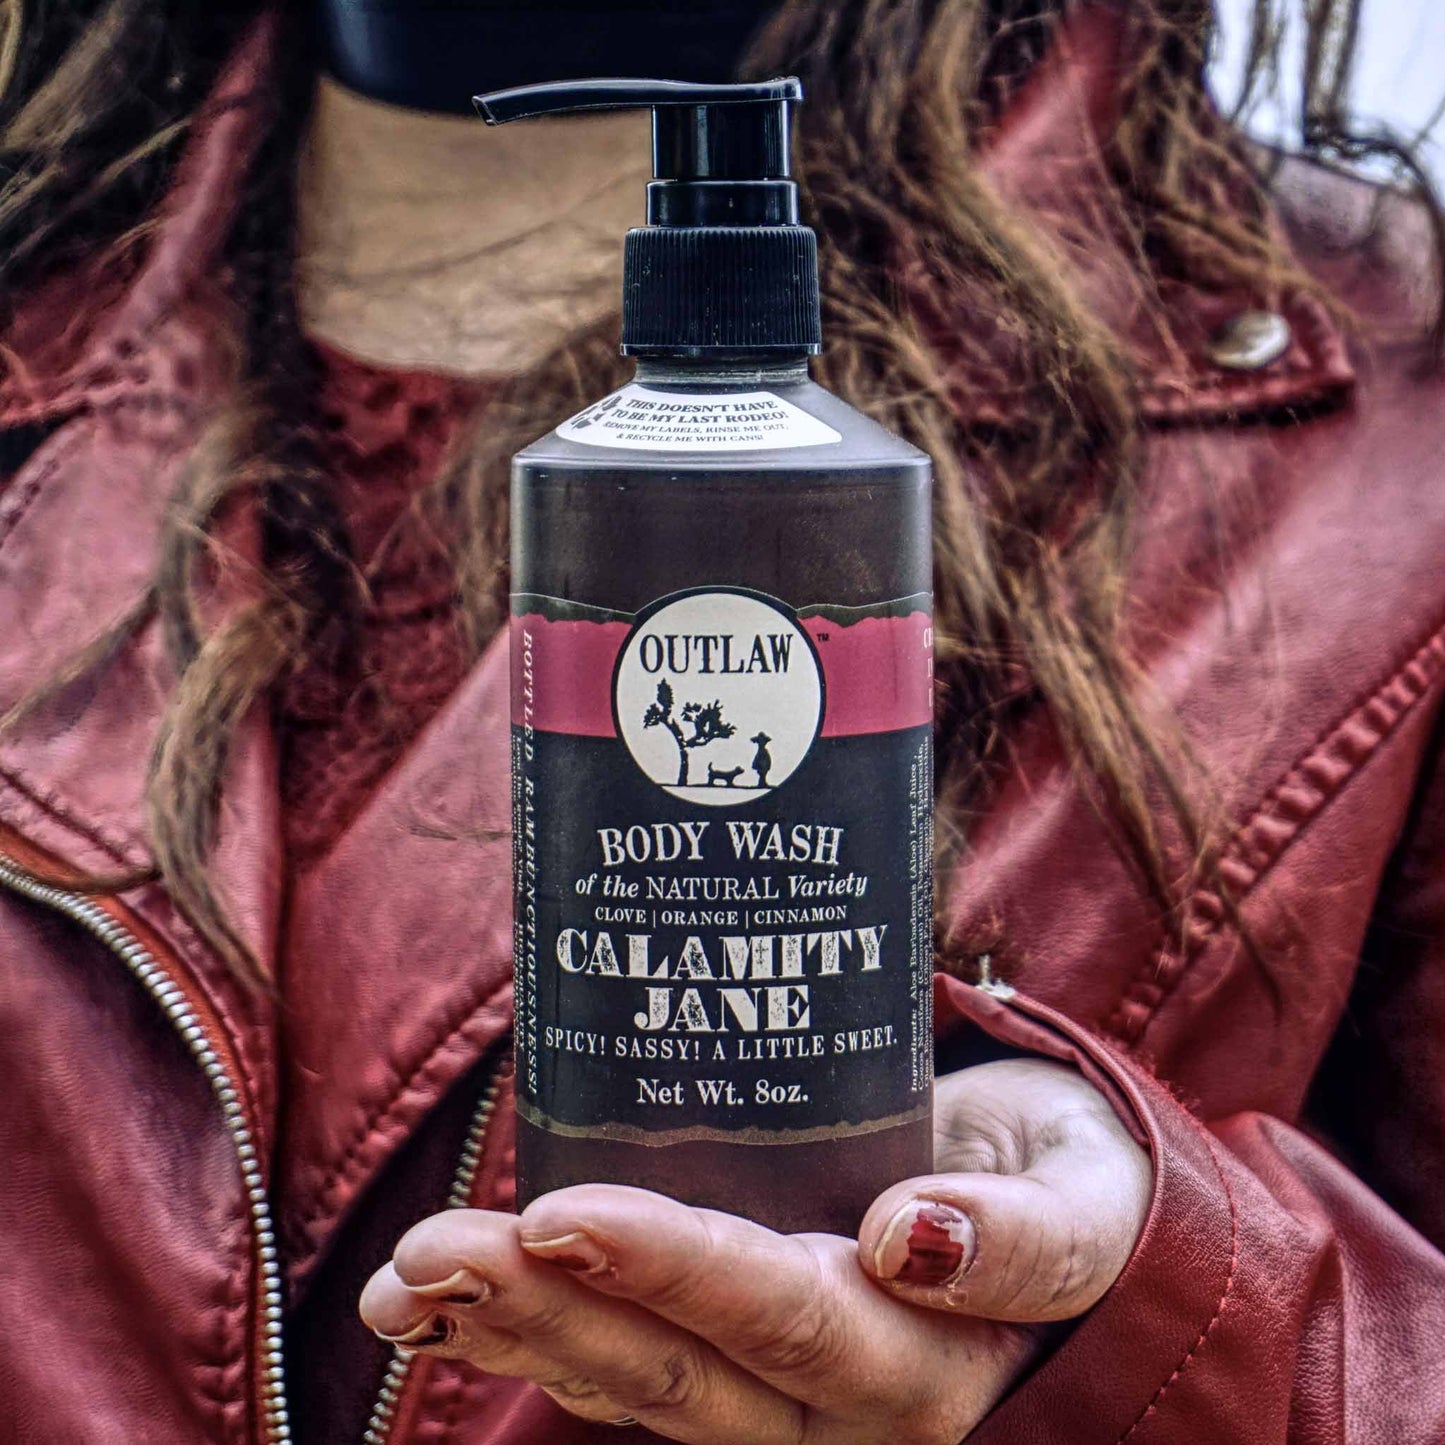 Natural body wash in Calamity Jane orange and cinnamon scent by Outlaw